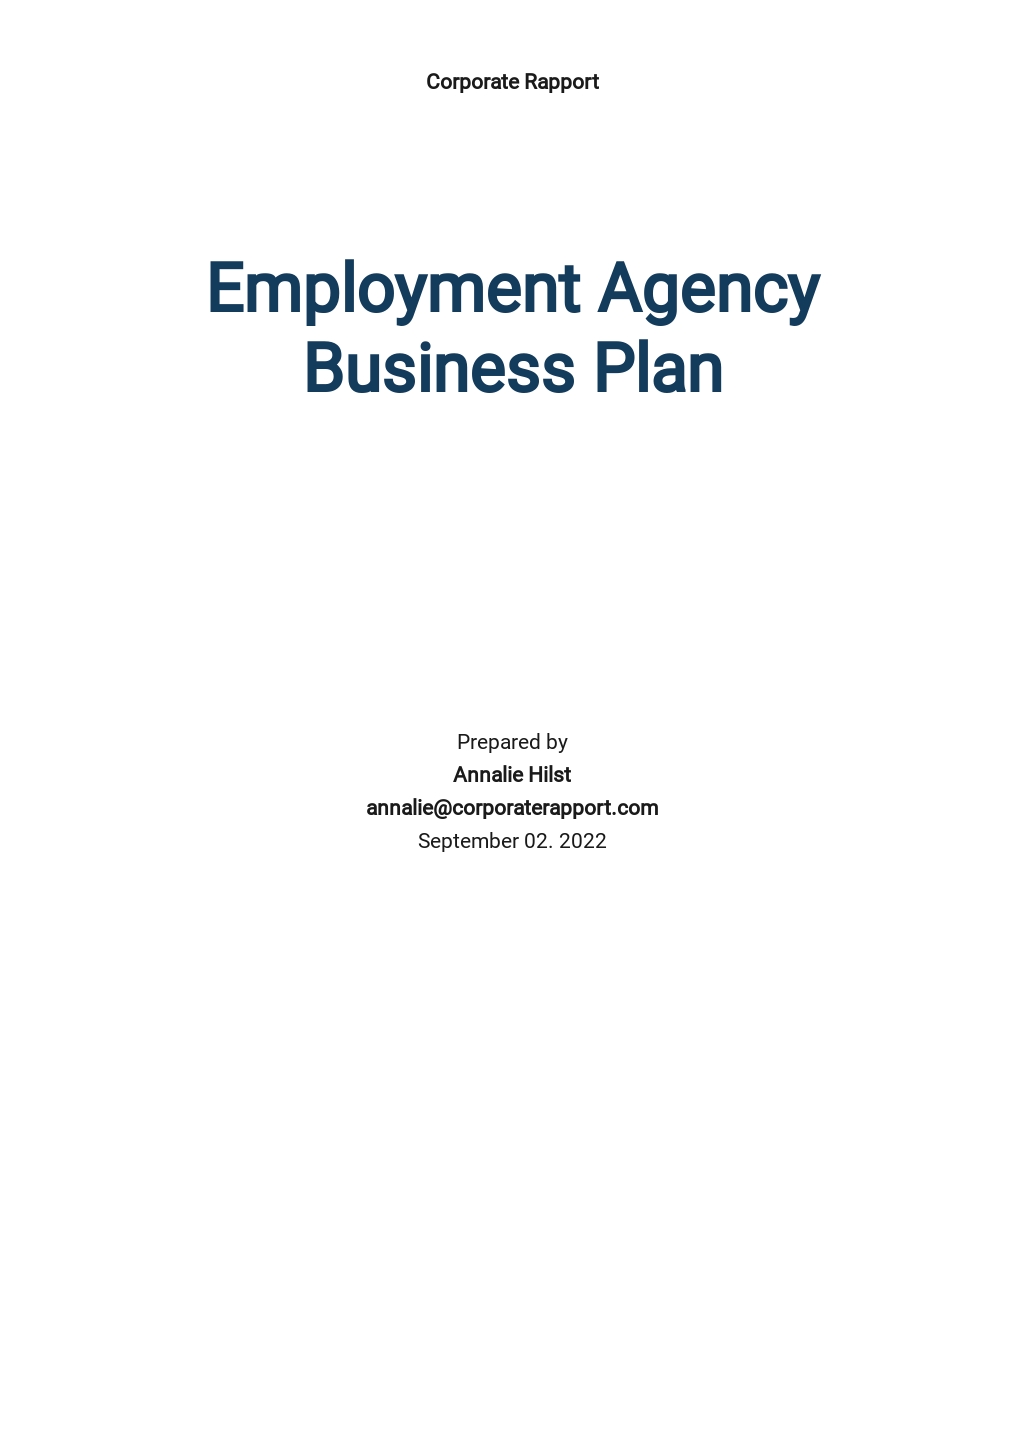 business plan for advertising agency